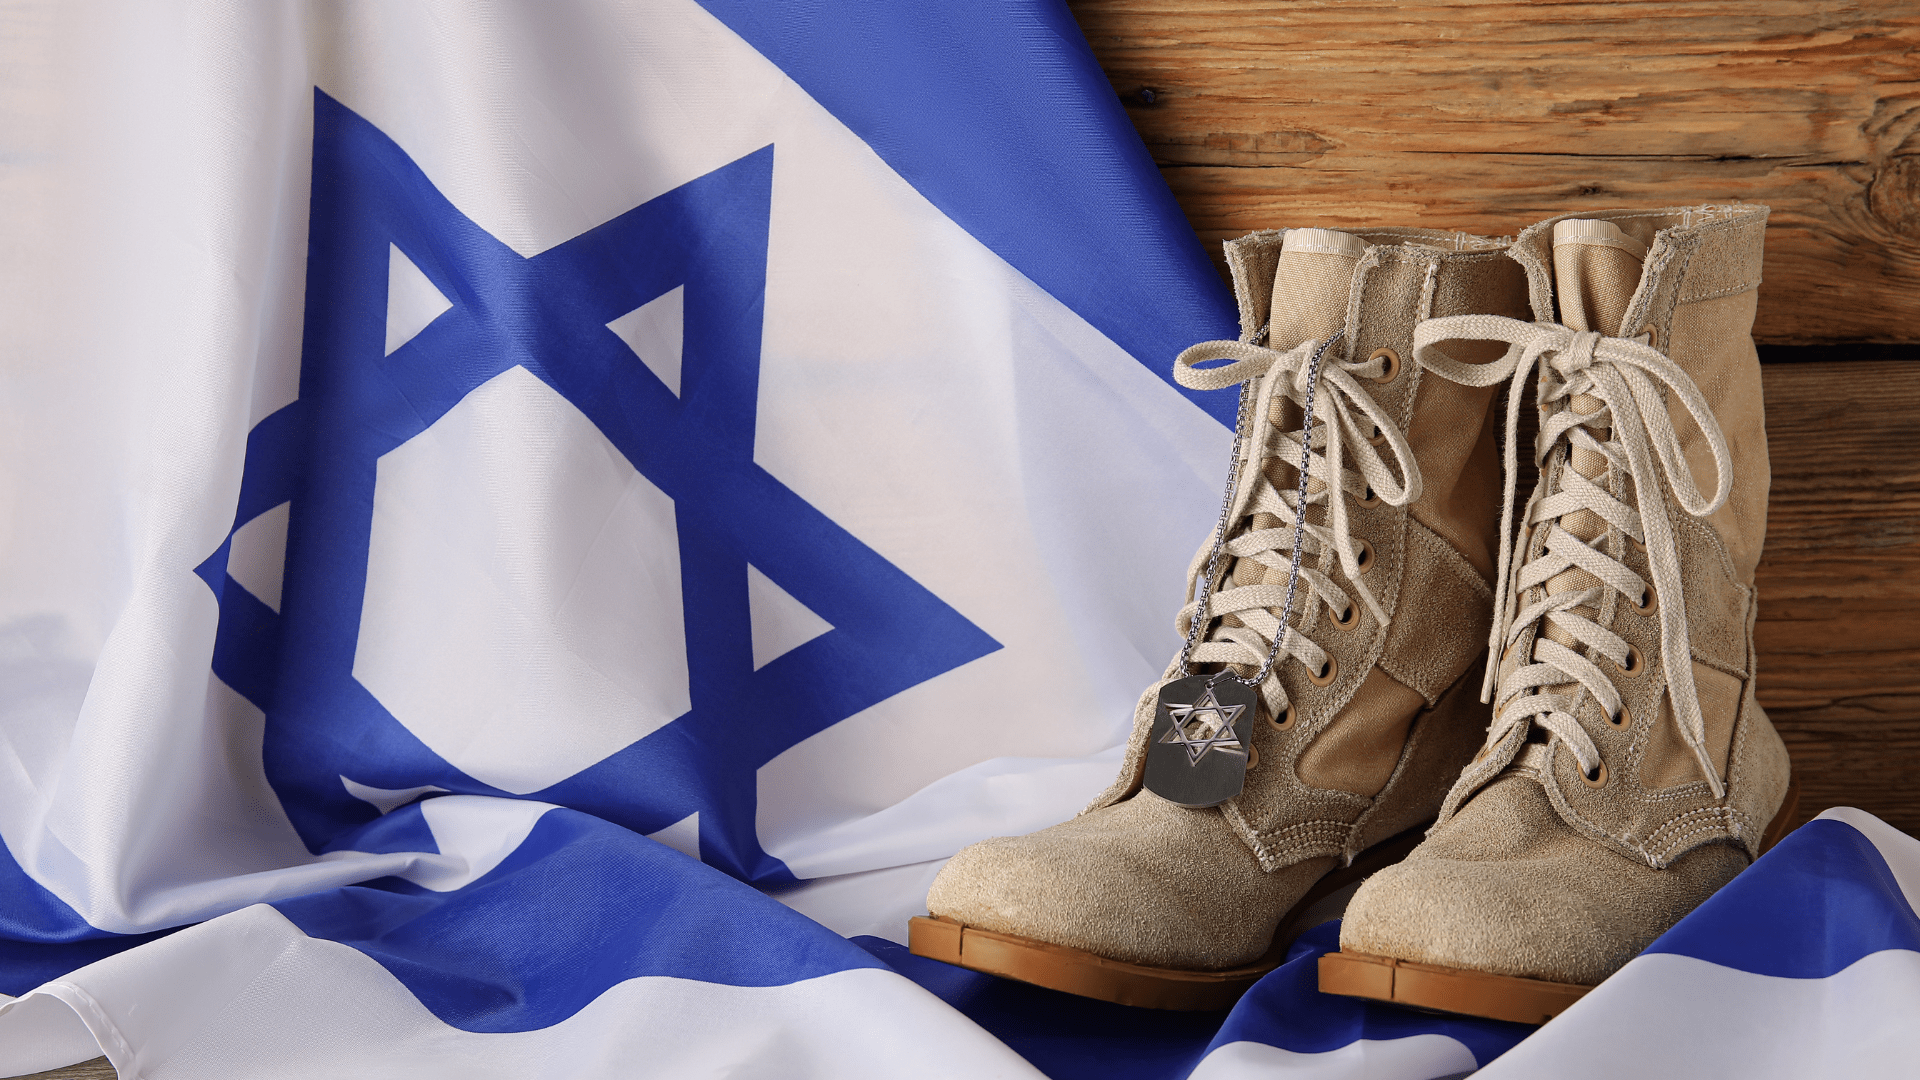 israel military flag and boots